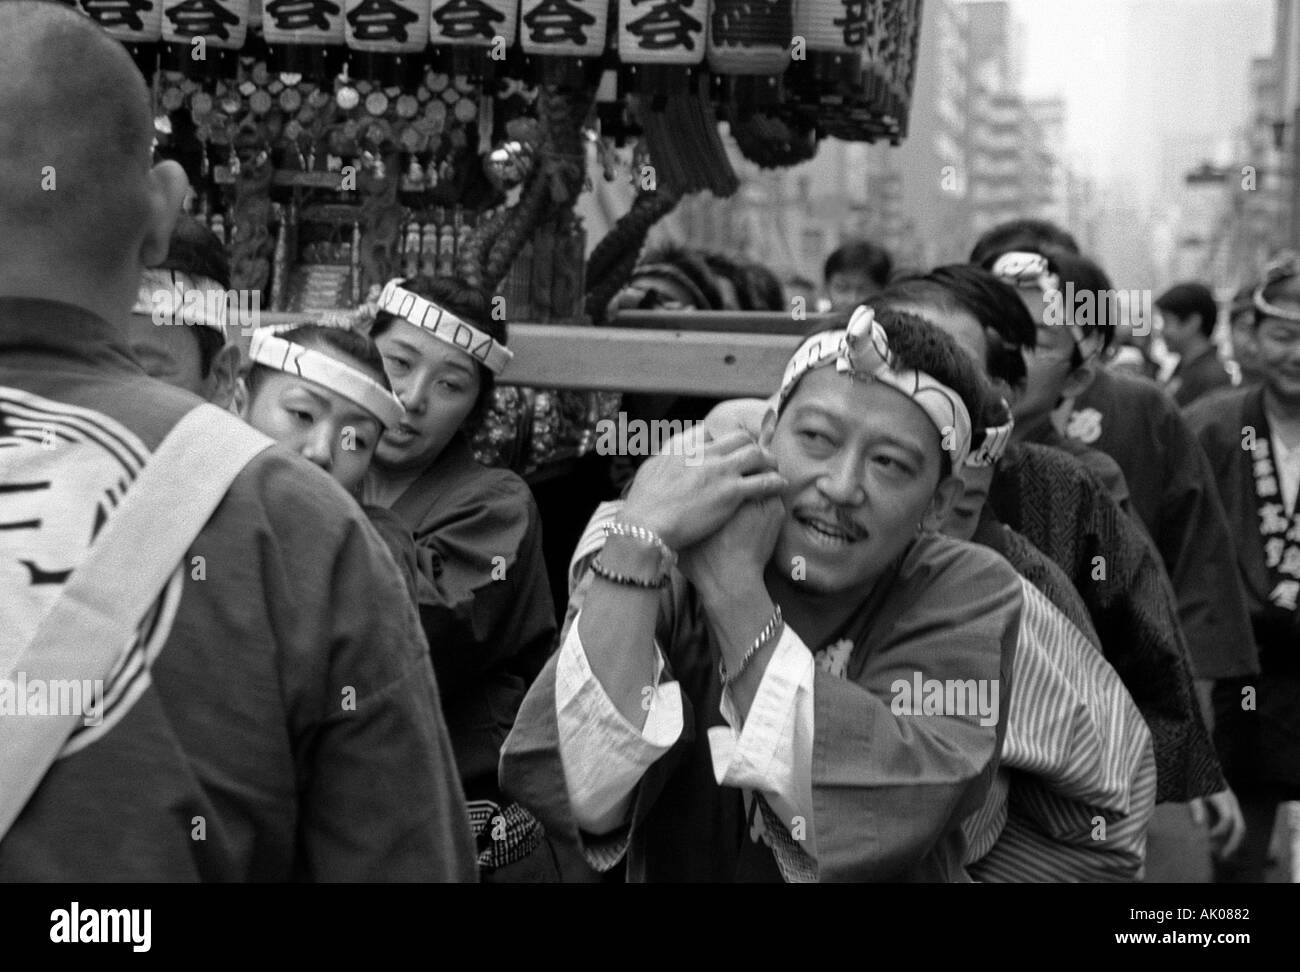 Group religious young men man boy woman celebrate march carry stall on shoulders Matsuri Festival Tokyo Japan Eastern Asia Stock Photo